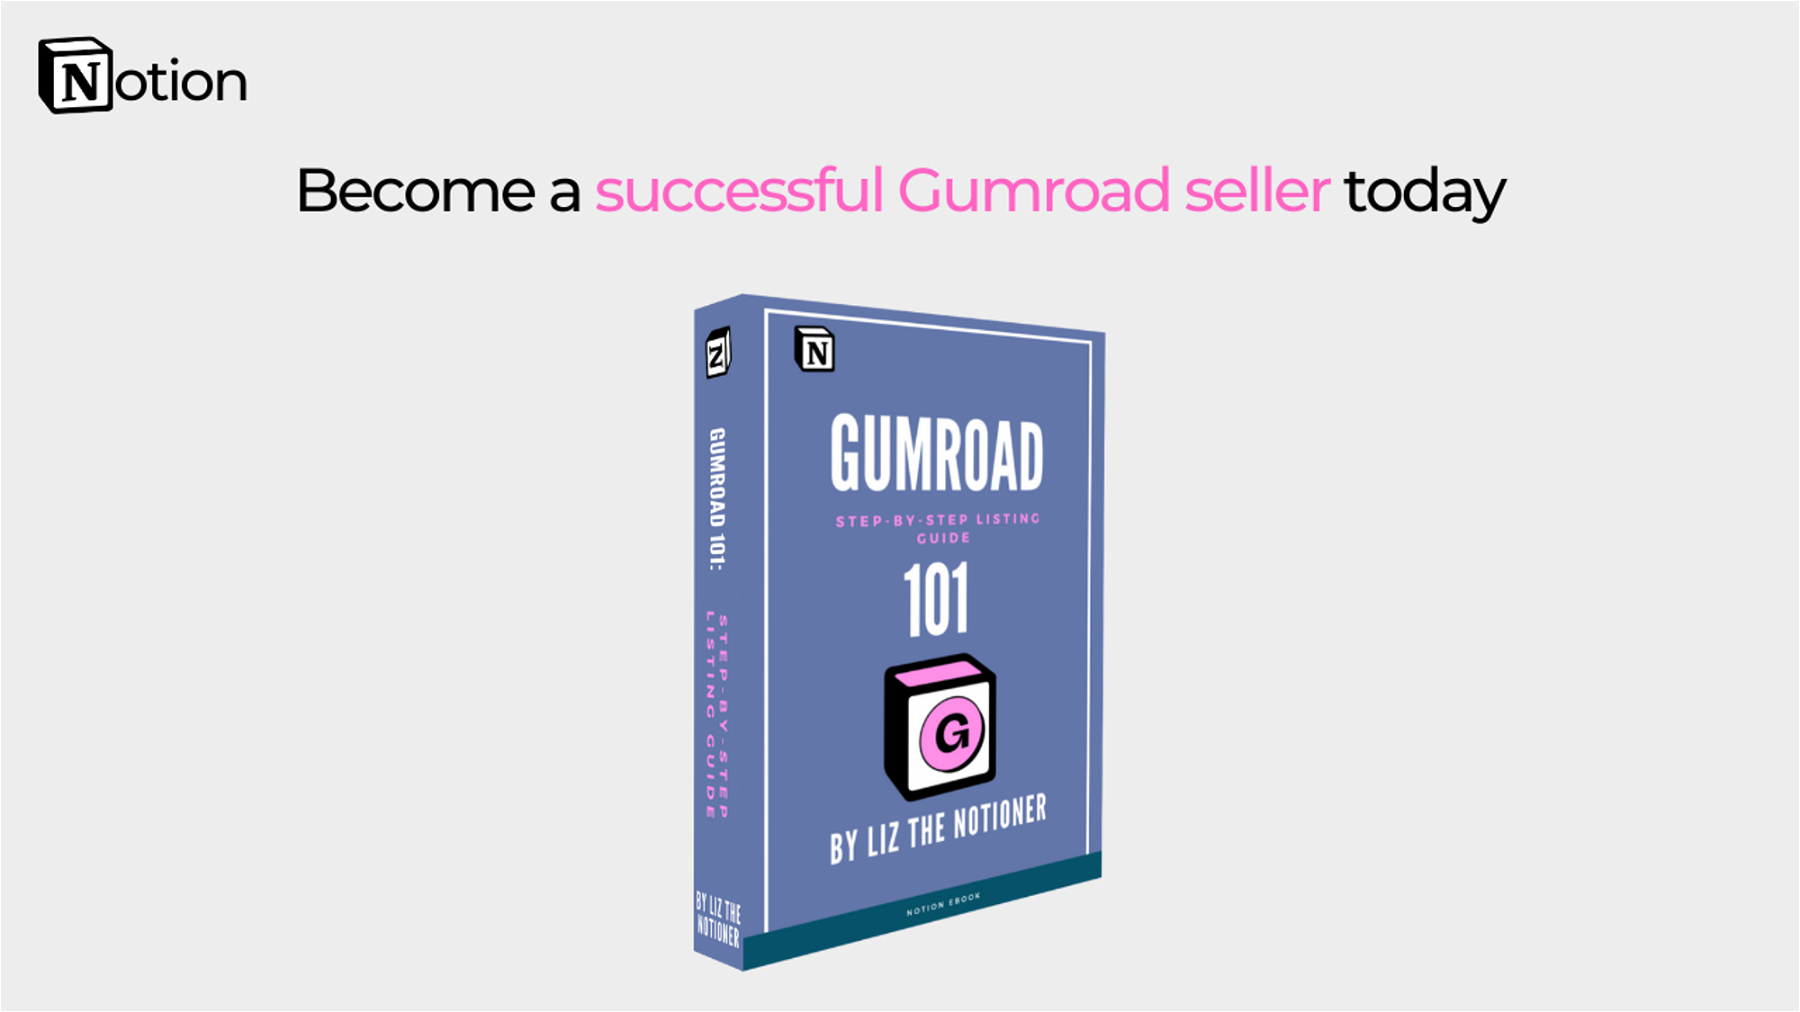 Gumroad 101: Step-by-step guide to listing - Notion Ebook